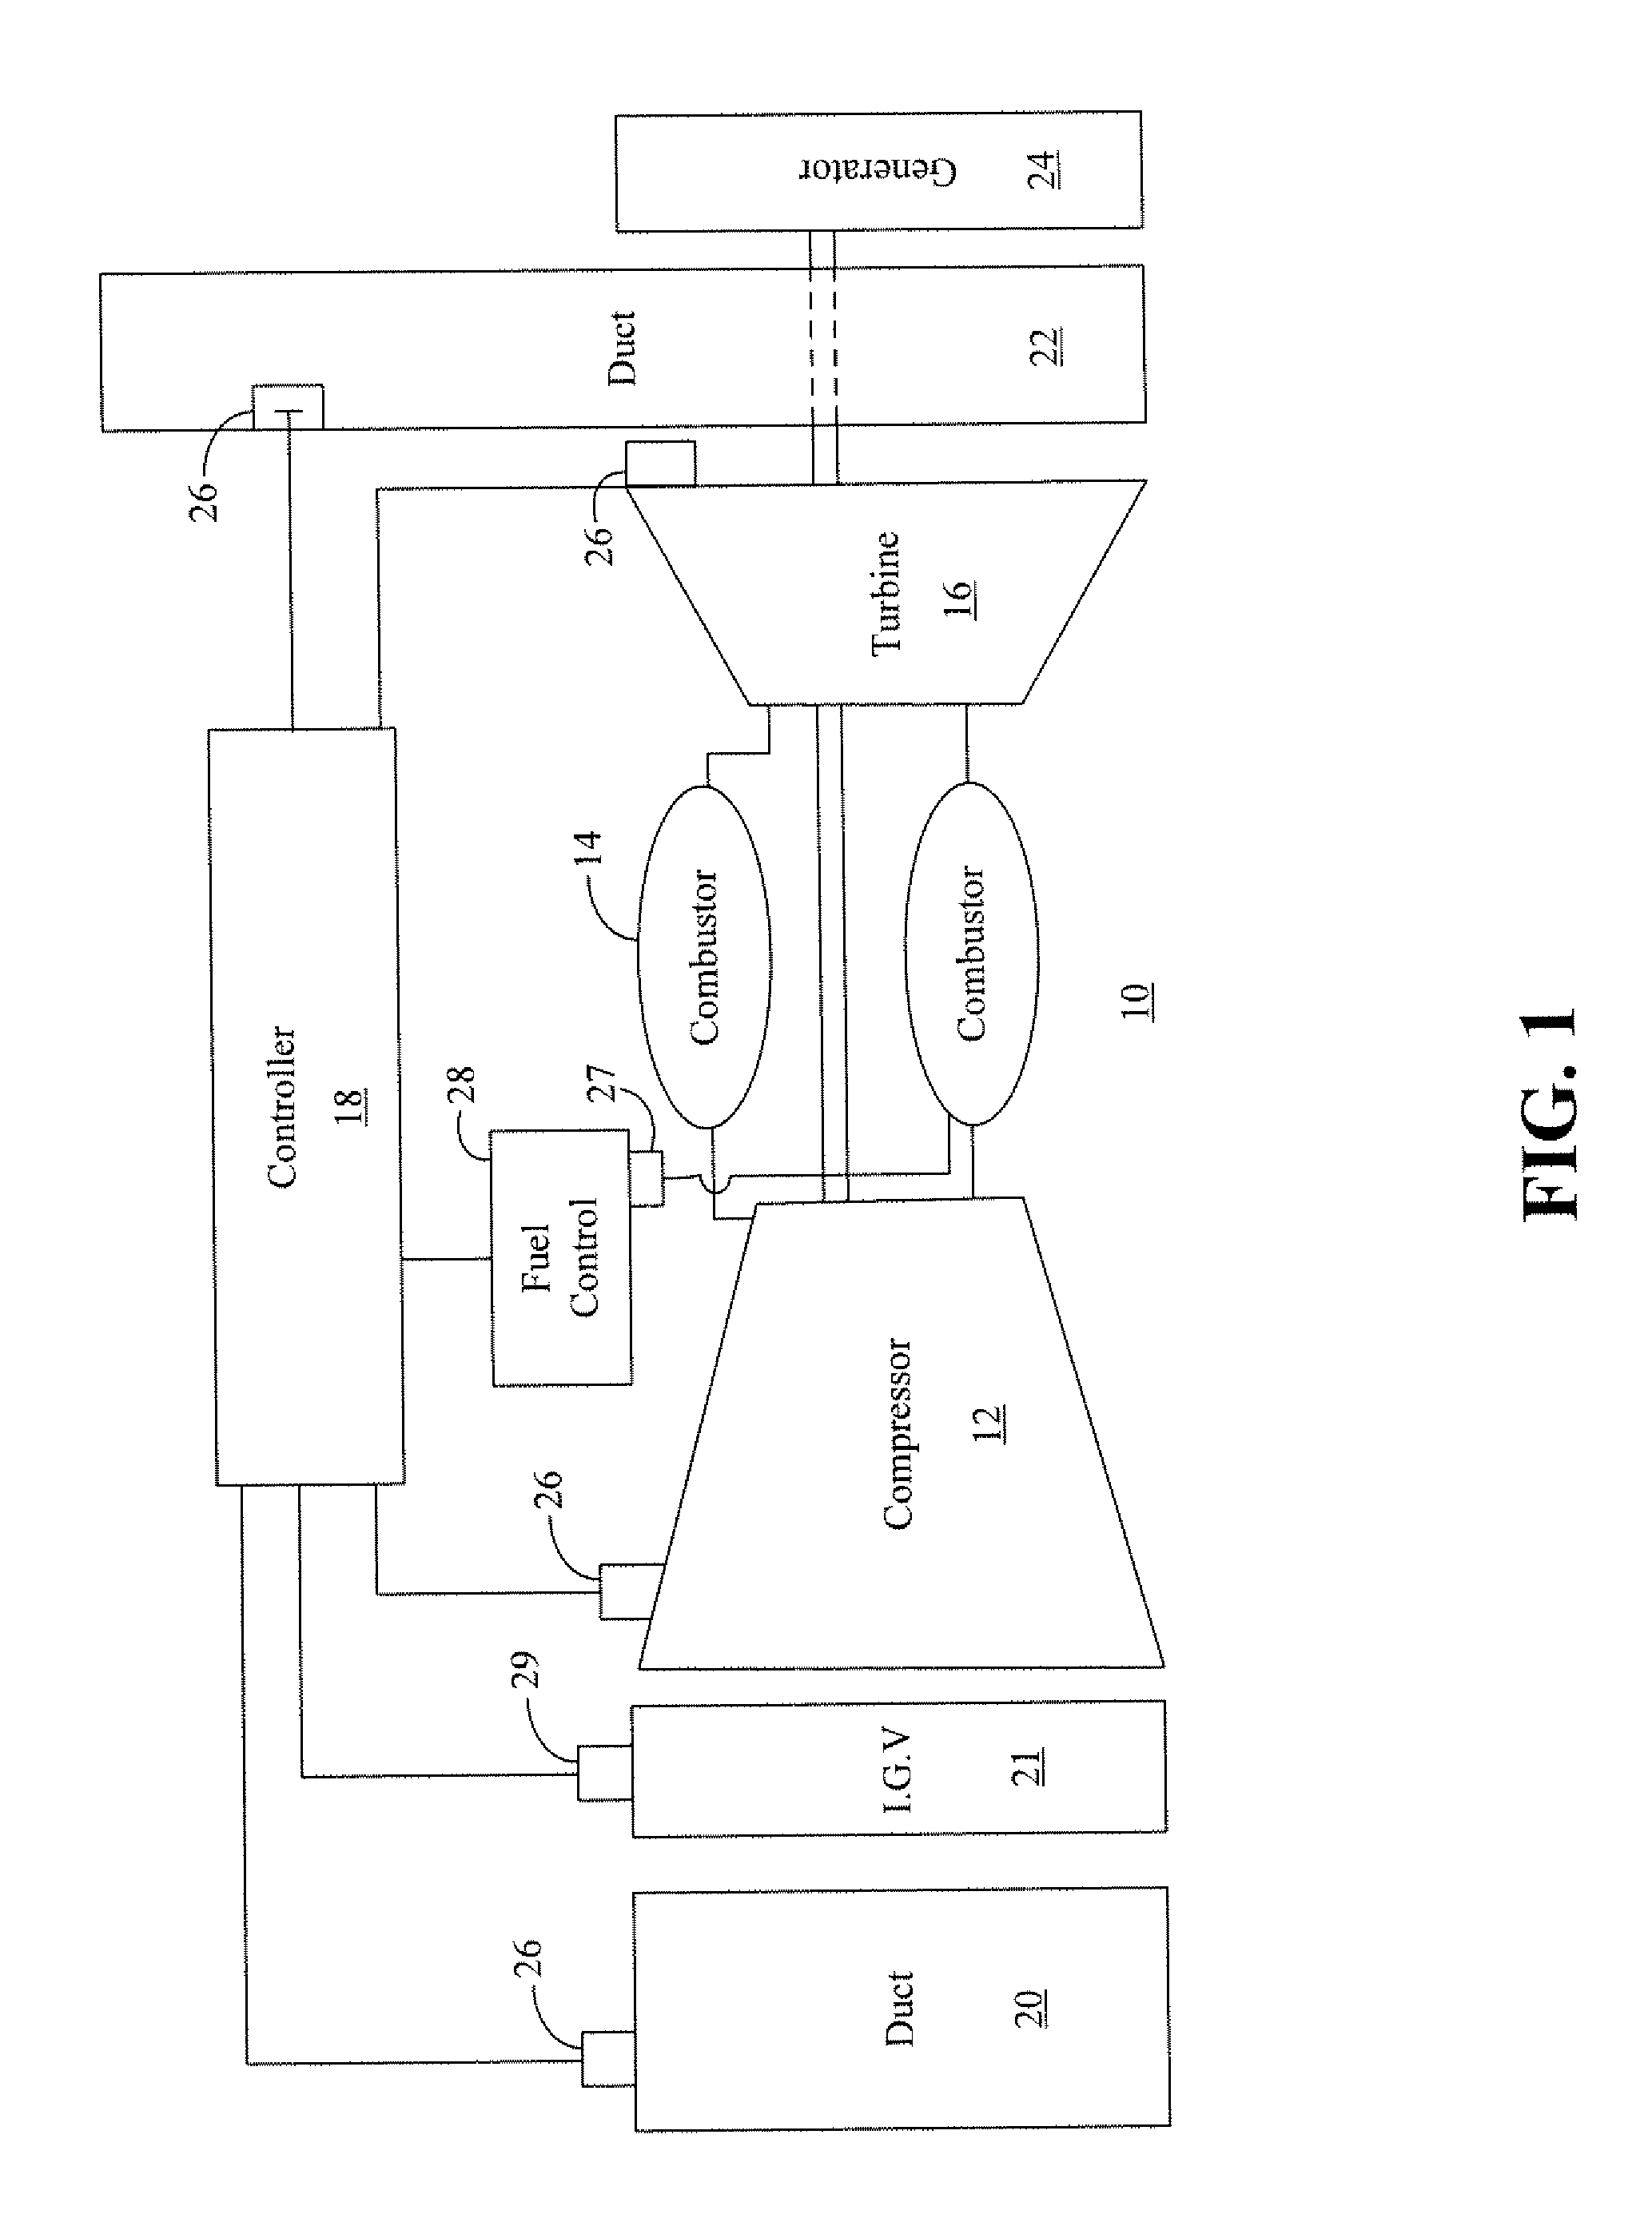 Methods and Systems for Model-Based Control of Gas Turbines